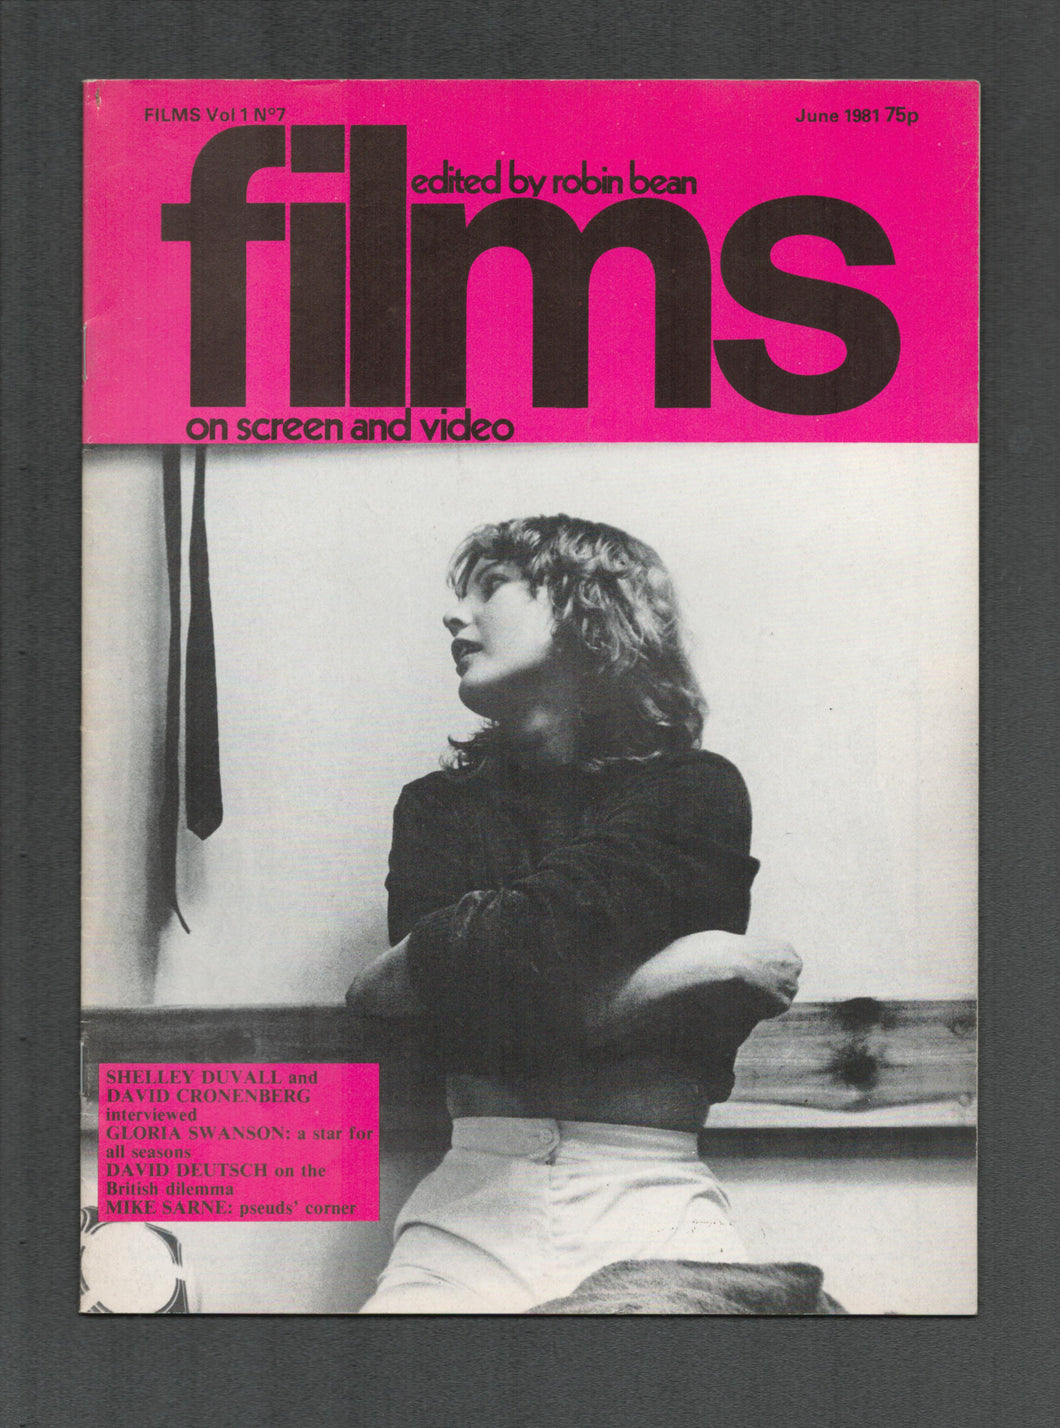 Films On Screen and Video Vol 1 No 7 June 1981